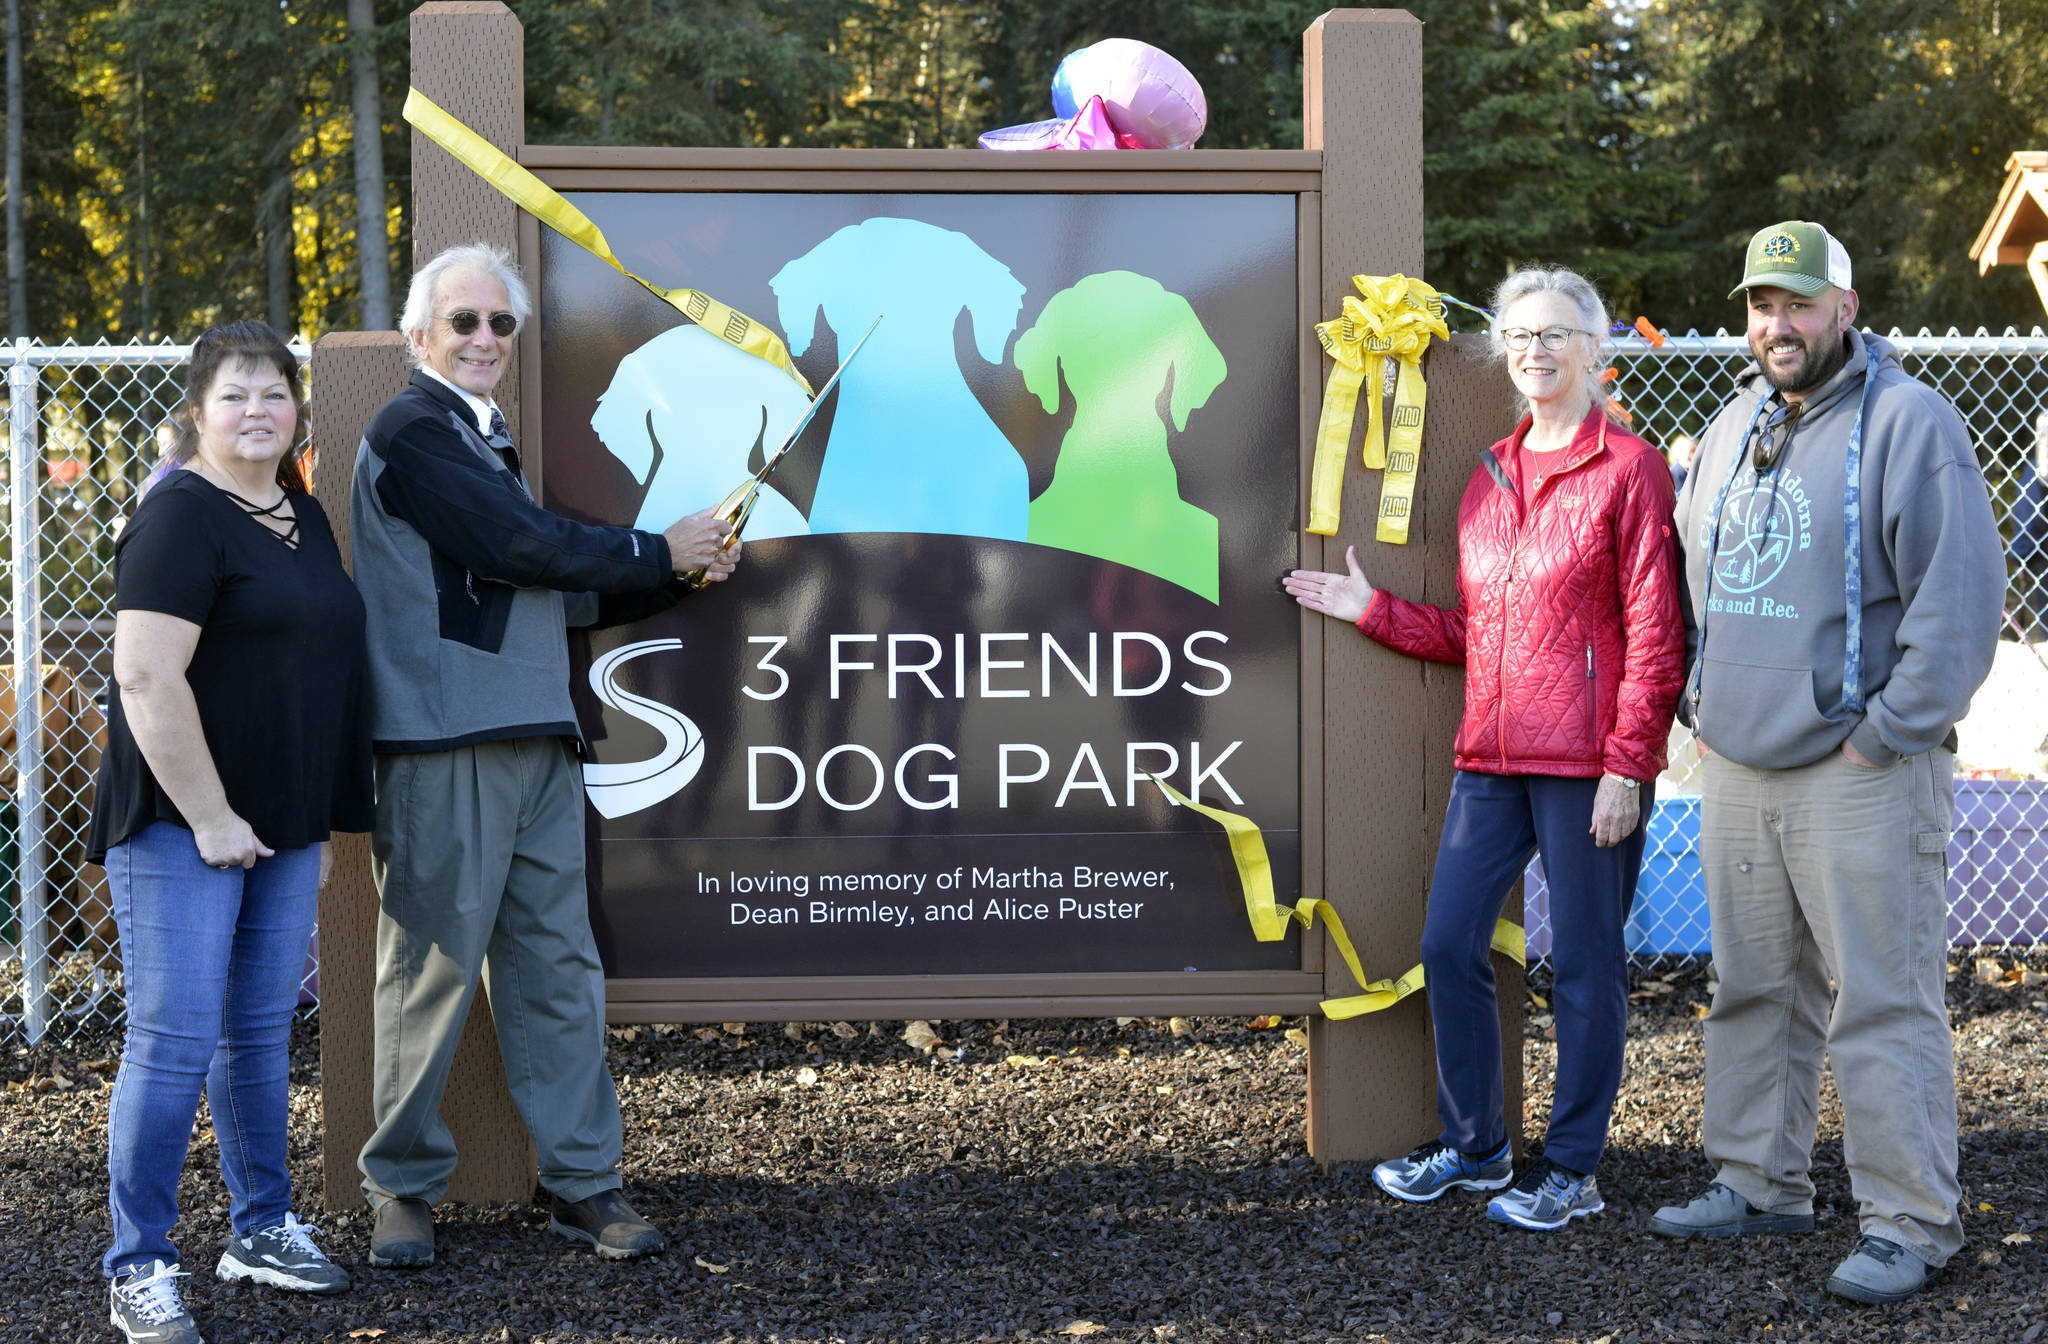 Soldotna Mayor Pete Sprague cuts the ribbon for the 3 Friends Dog Park on North Aspen Drive in Soldotna, Alaska on Saturday, September 30, 2017. “It’s kind of ironic for a former mailman to be dedicating a dog park,” Sprague said. He is joined by Connie Hocker, left, Nancy Courtright and Joel Todd. Hocker was a driving force behind the creation of the dog park. Courtright acted as the executor of the estate left by Martha Brewer, from which the park was funded. Todd, from Soldotna Parks and Recreation, “has been instrumental in making all the dreams come true in the park,” said Hocker. (Photo by Kat Sorensen/Peninsula Clarion)